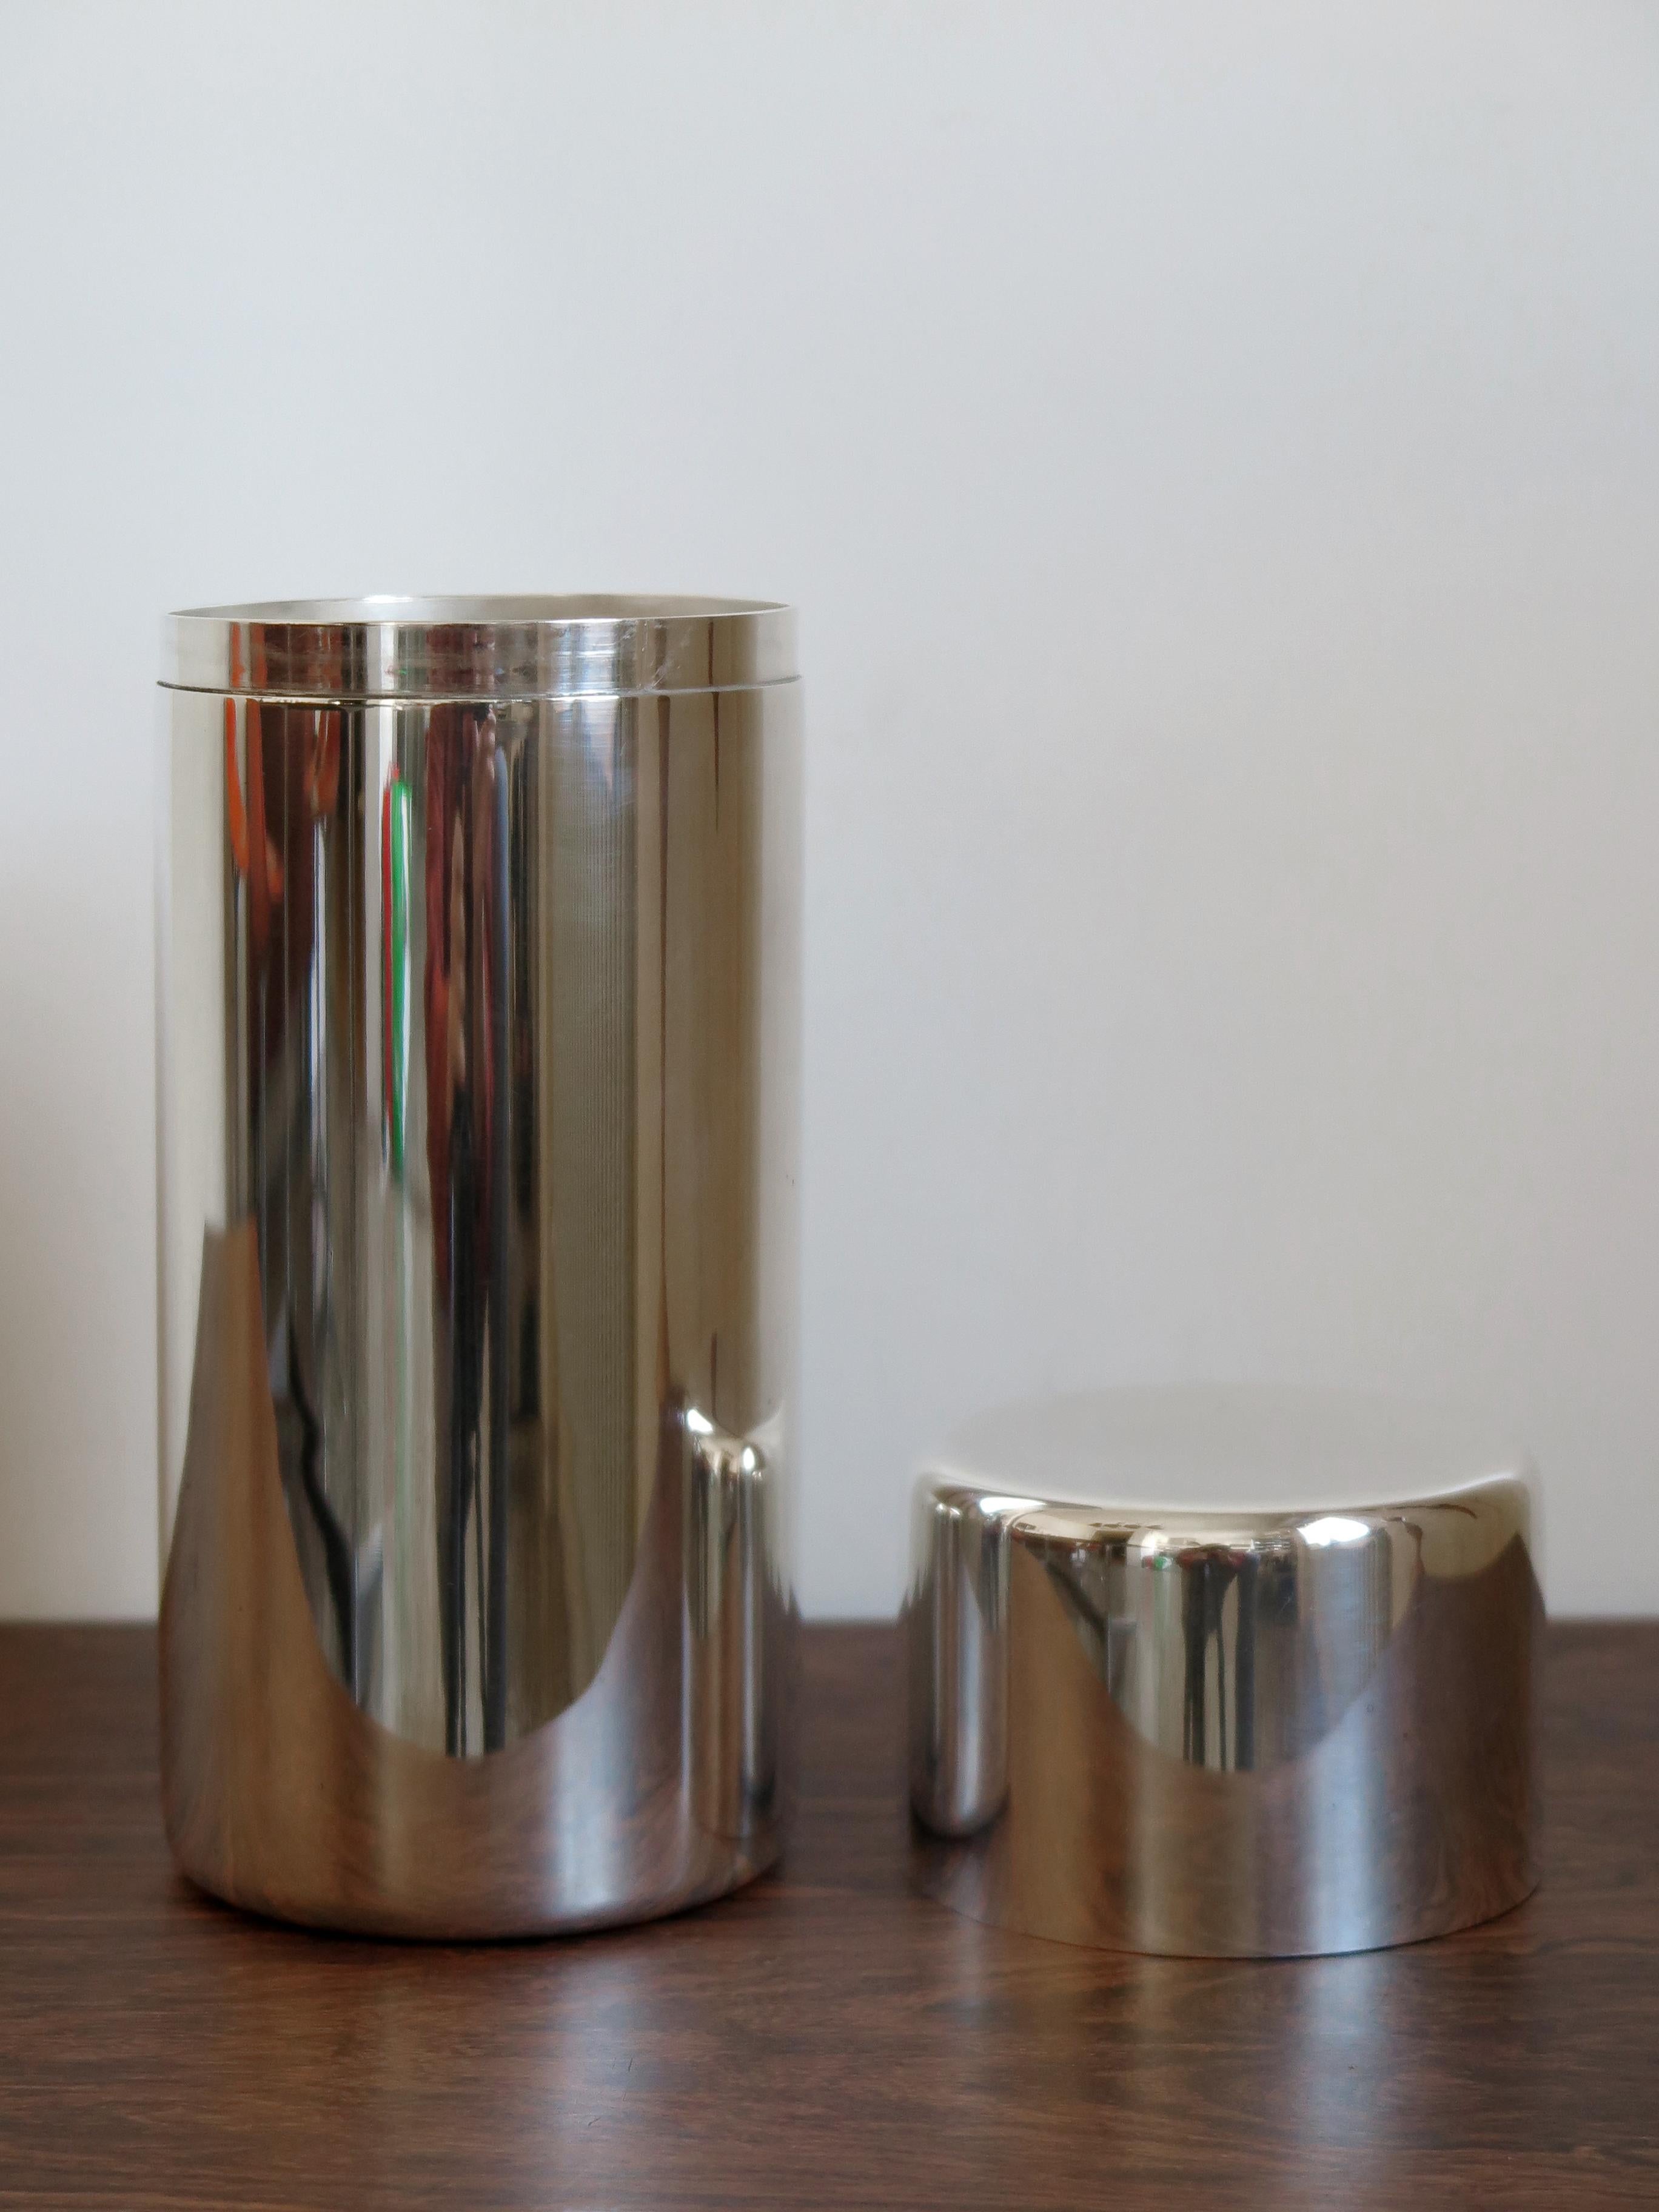 Italian Mid-Century Modern design cylindrical container for breadsticks or decorative box in silver metal designed by Lino Sabattini, engraved Sabattini Made in Italy under the base, 1960s

Please note that the item is original of the period and